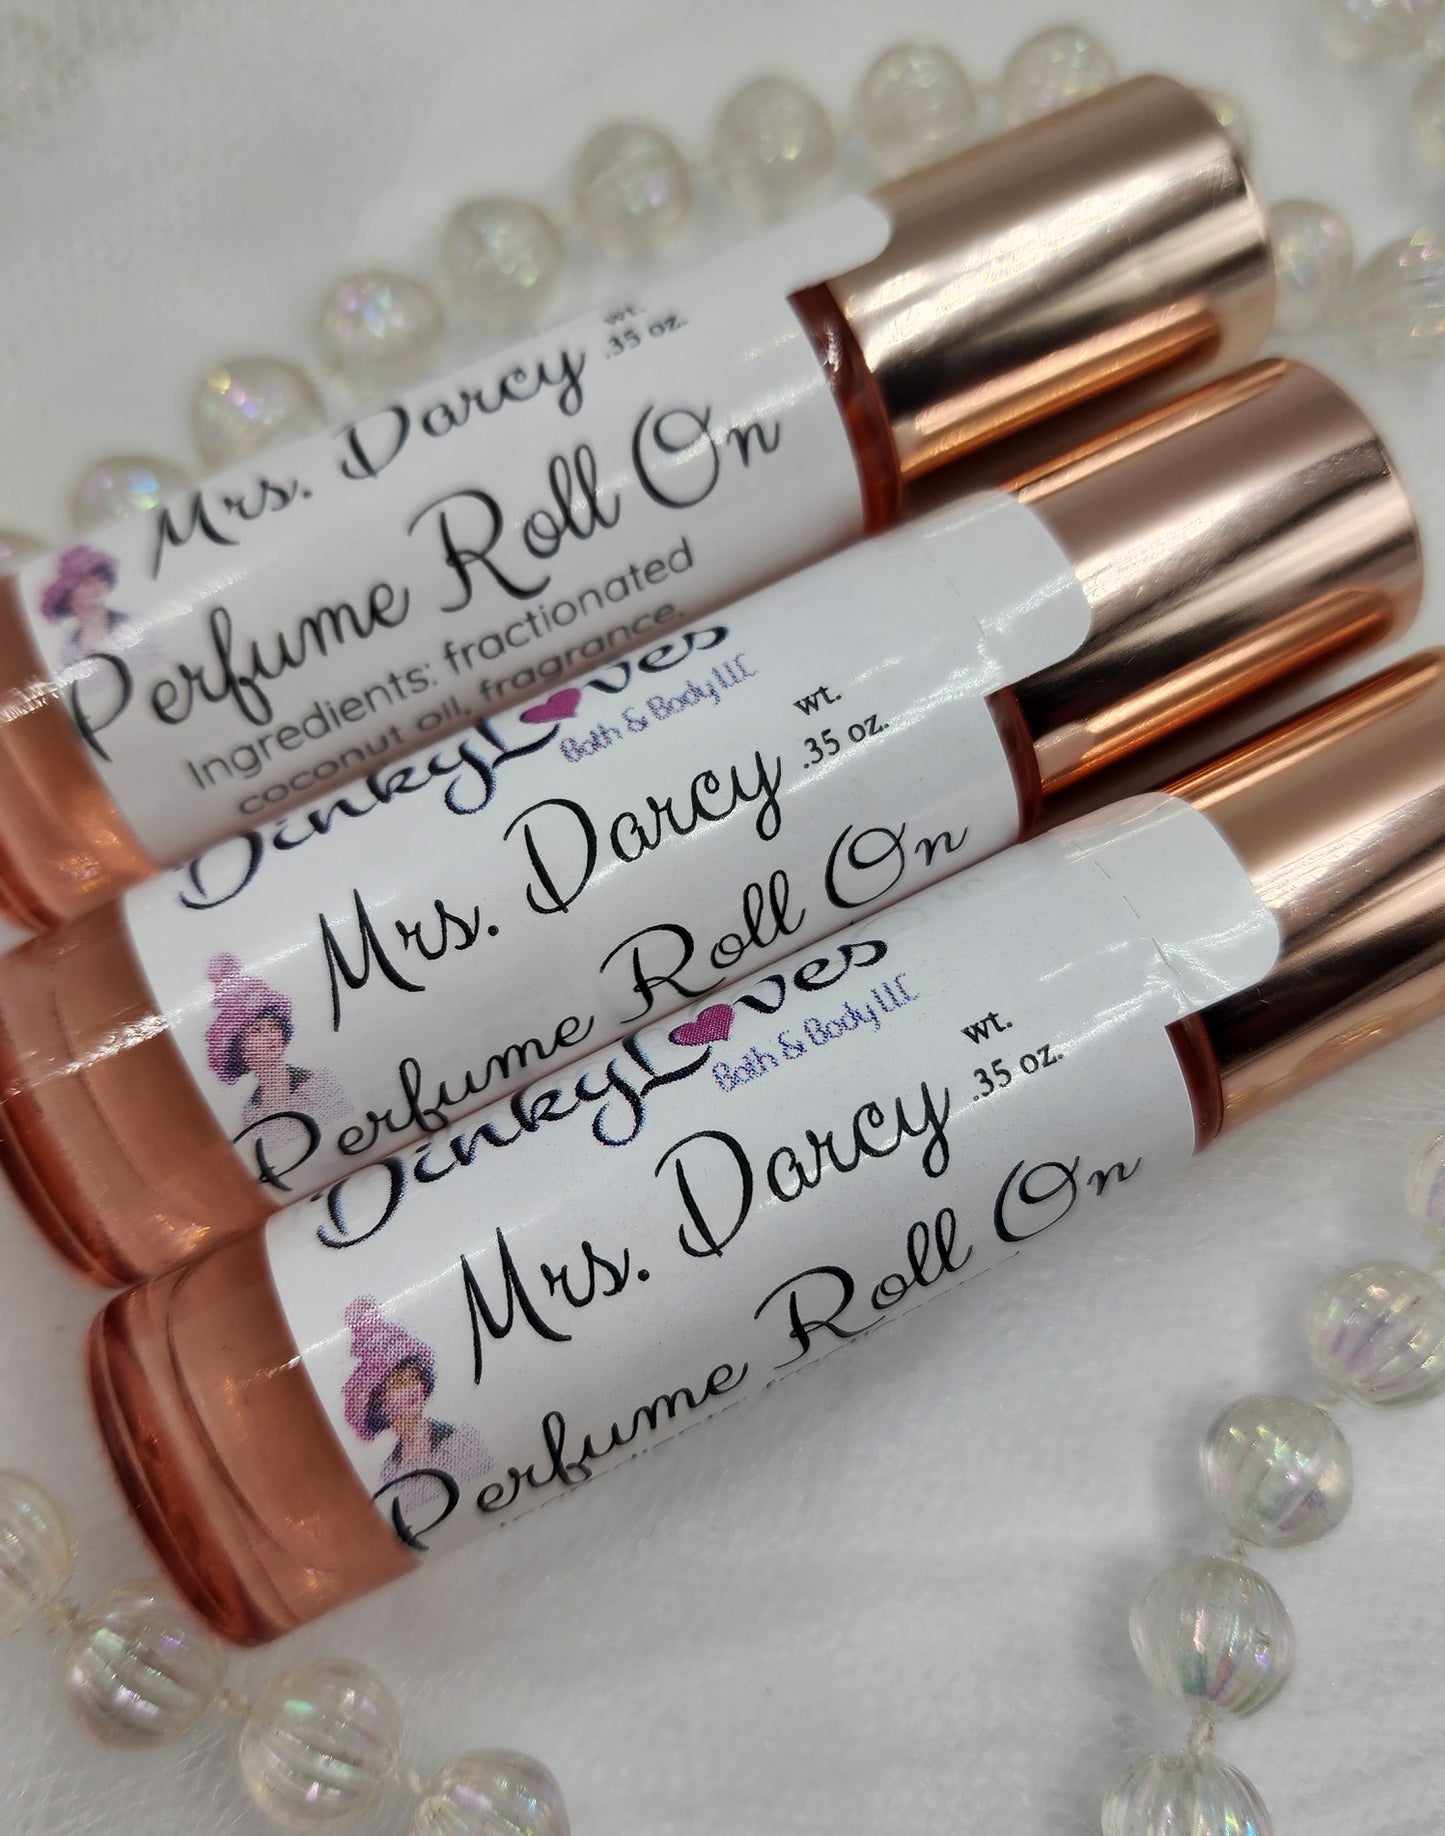 MRS. DARCY Perfume Oil Roll On